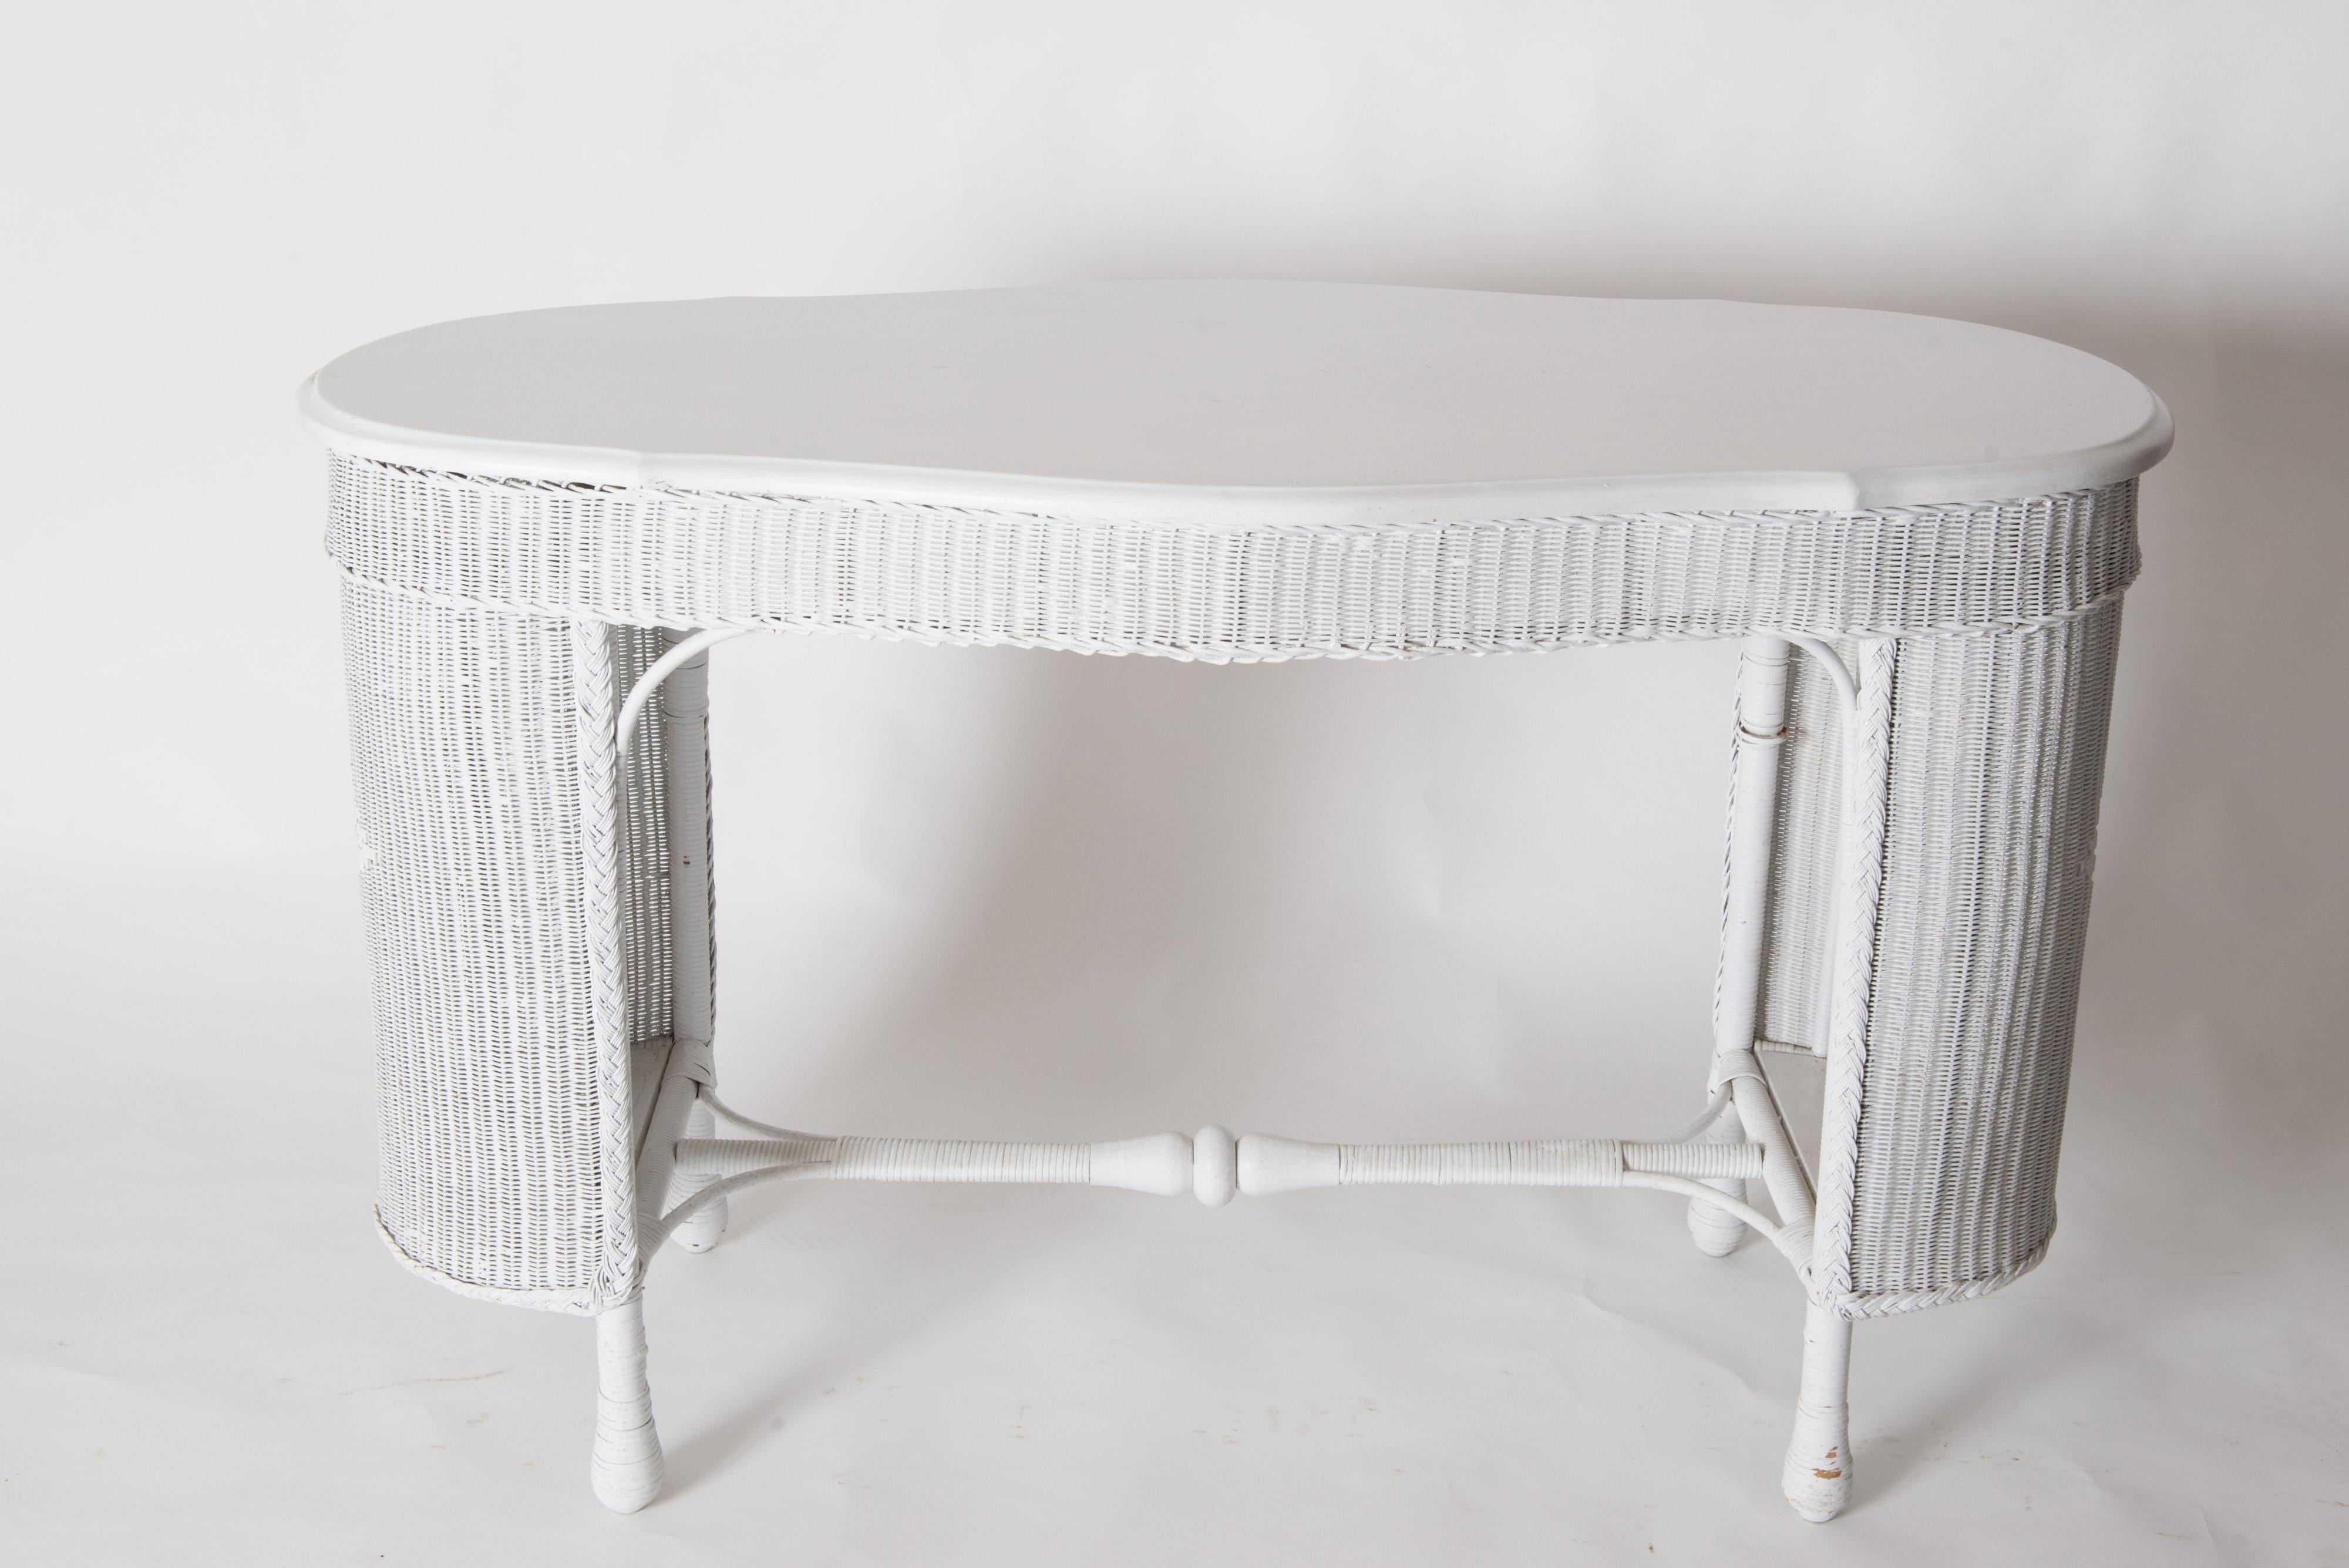 Vintage wicker reed/rattan table or writing desk with a wicker chair. Bothe pieces are early 19th century and freshly painted light grey. Excellent vintage condition.